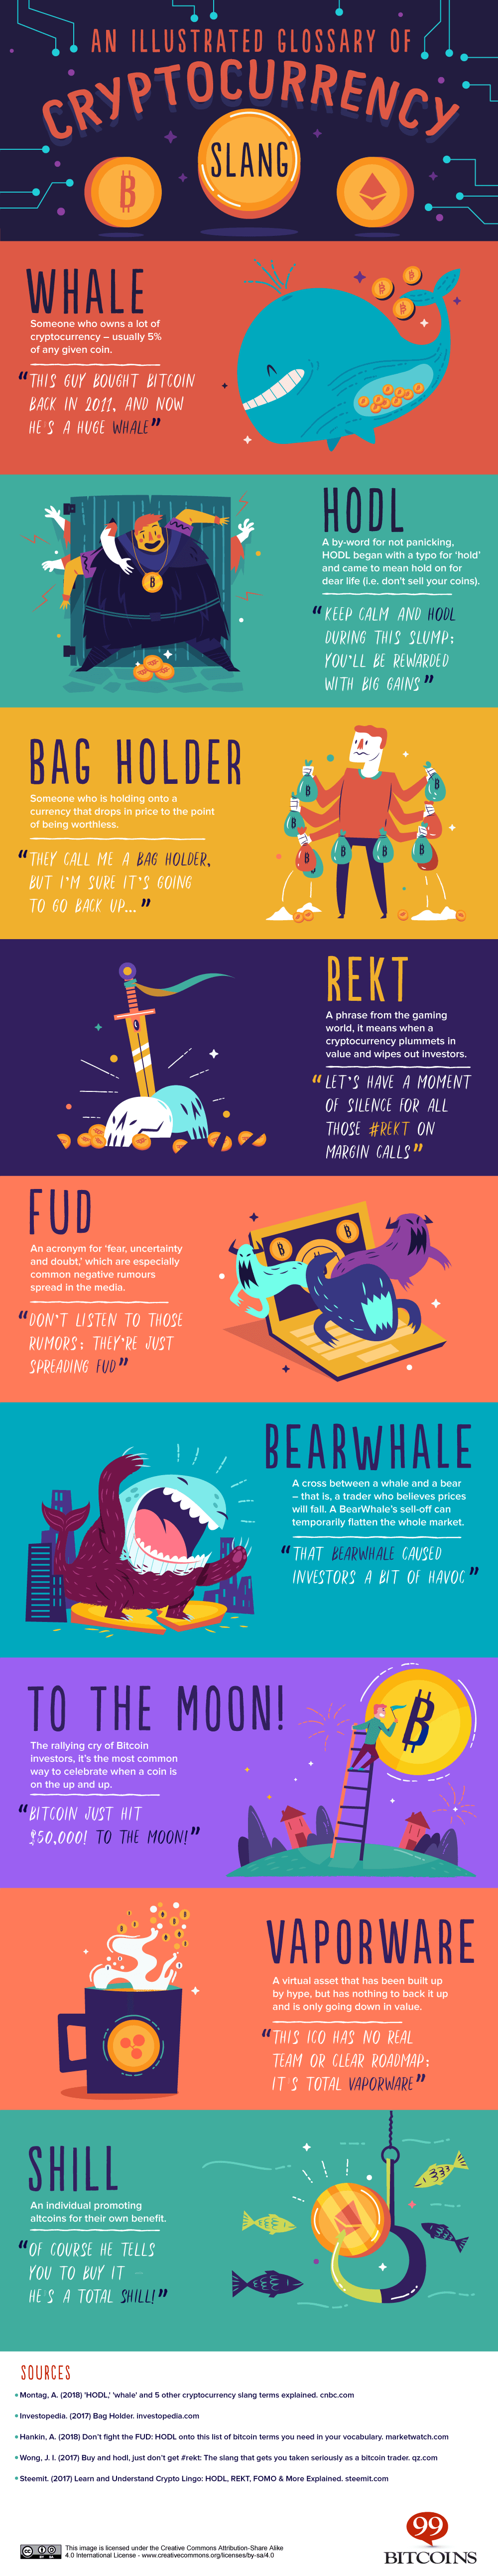 An illustrated glossary of cryptocurrency slang